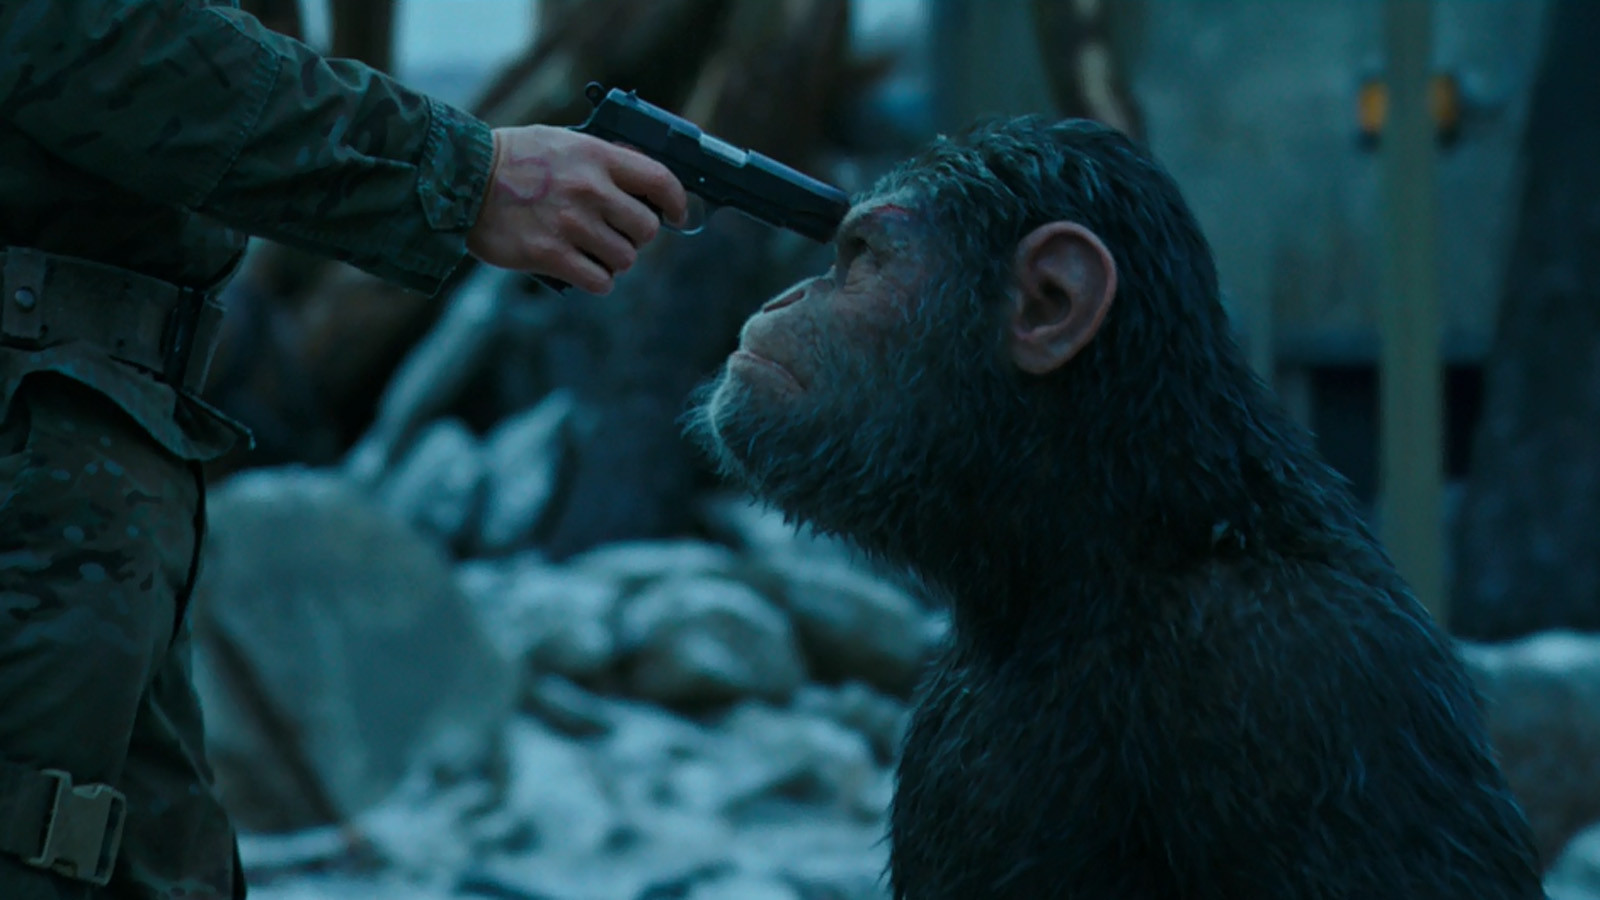 MOVIES: War for the Planet of the Apes - Review